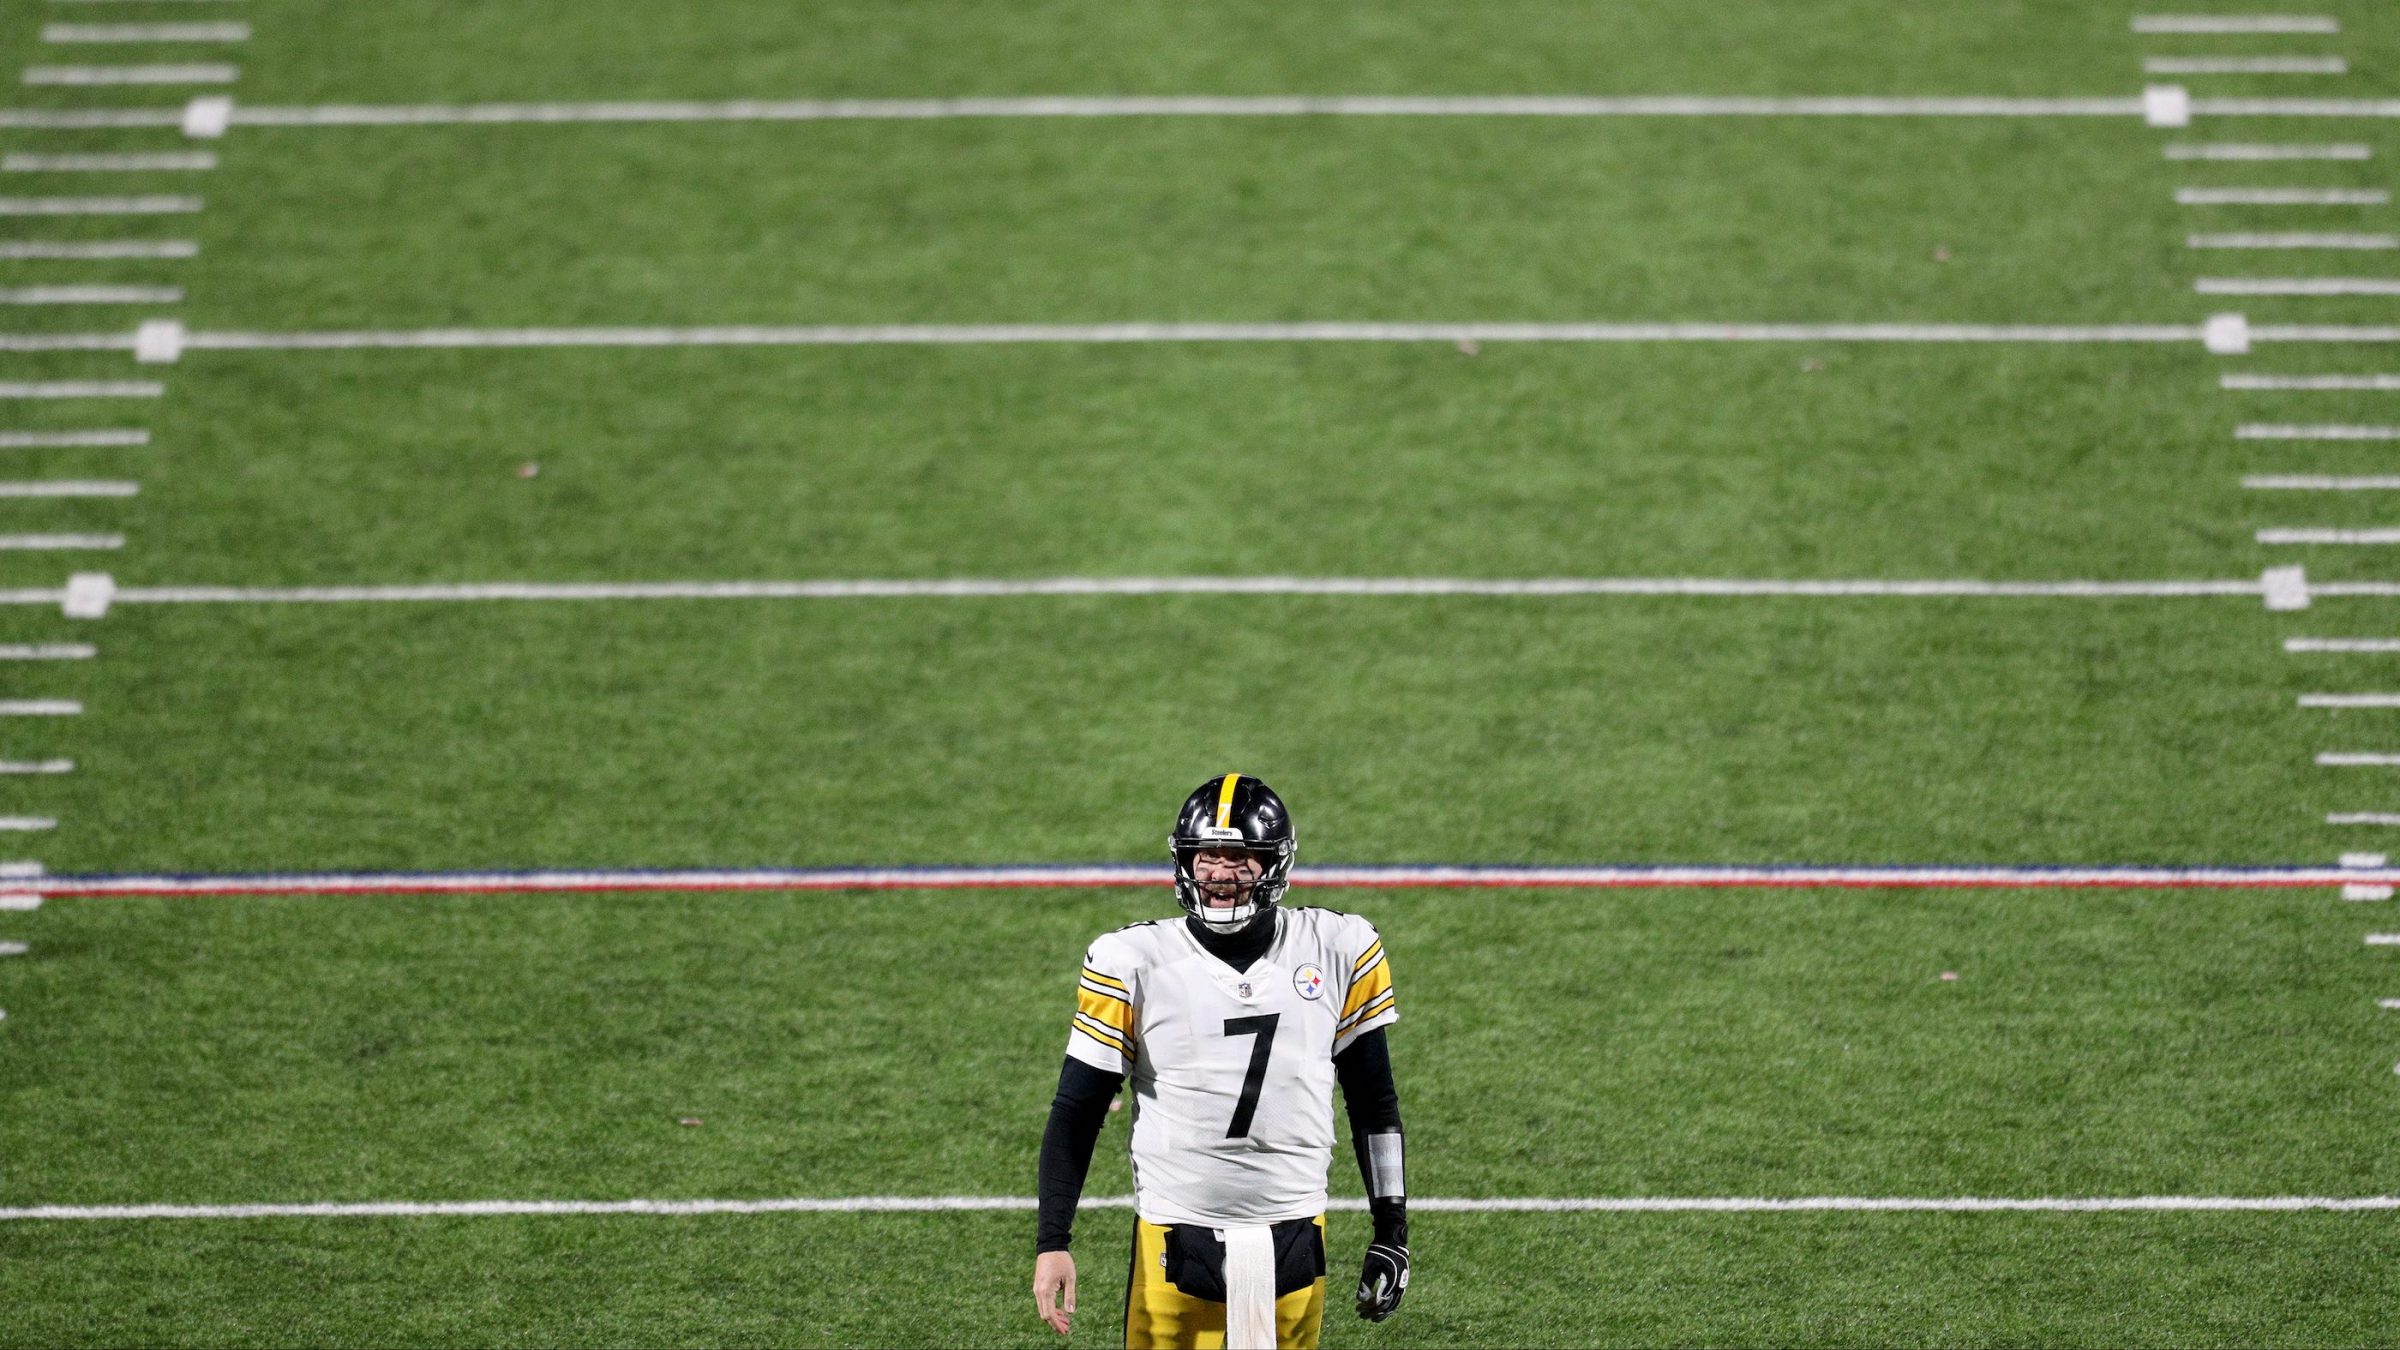 Steelers quarterback Ben Roethlisberger stands on a football field by himself.